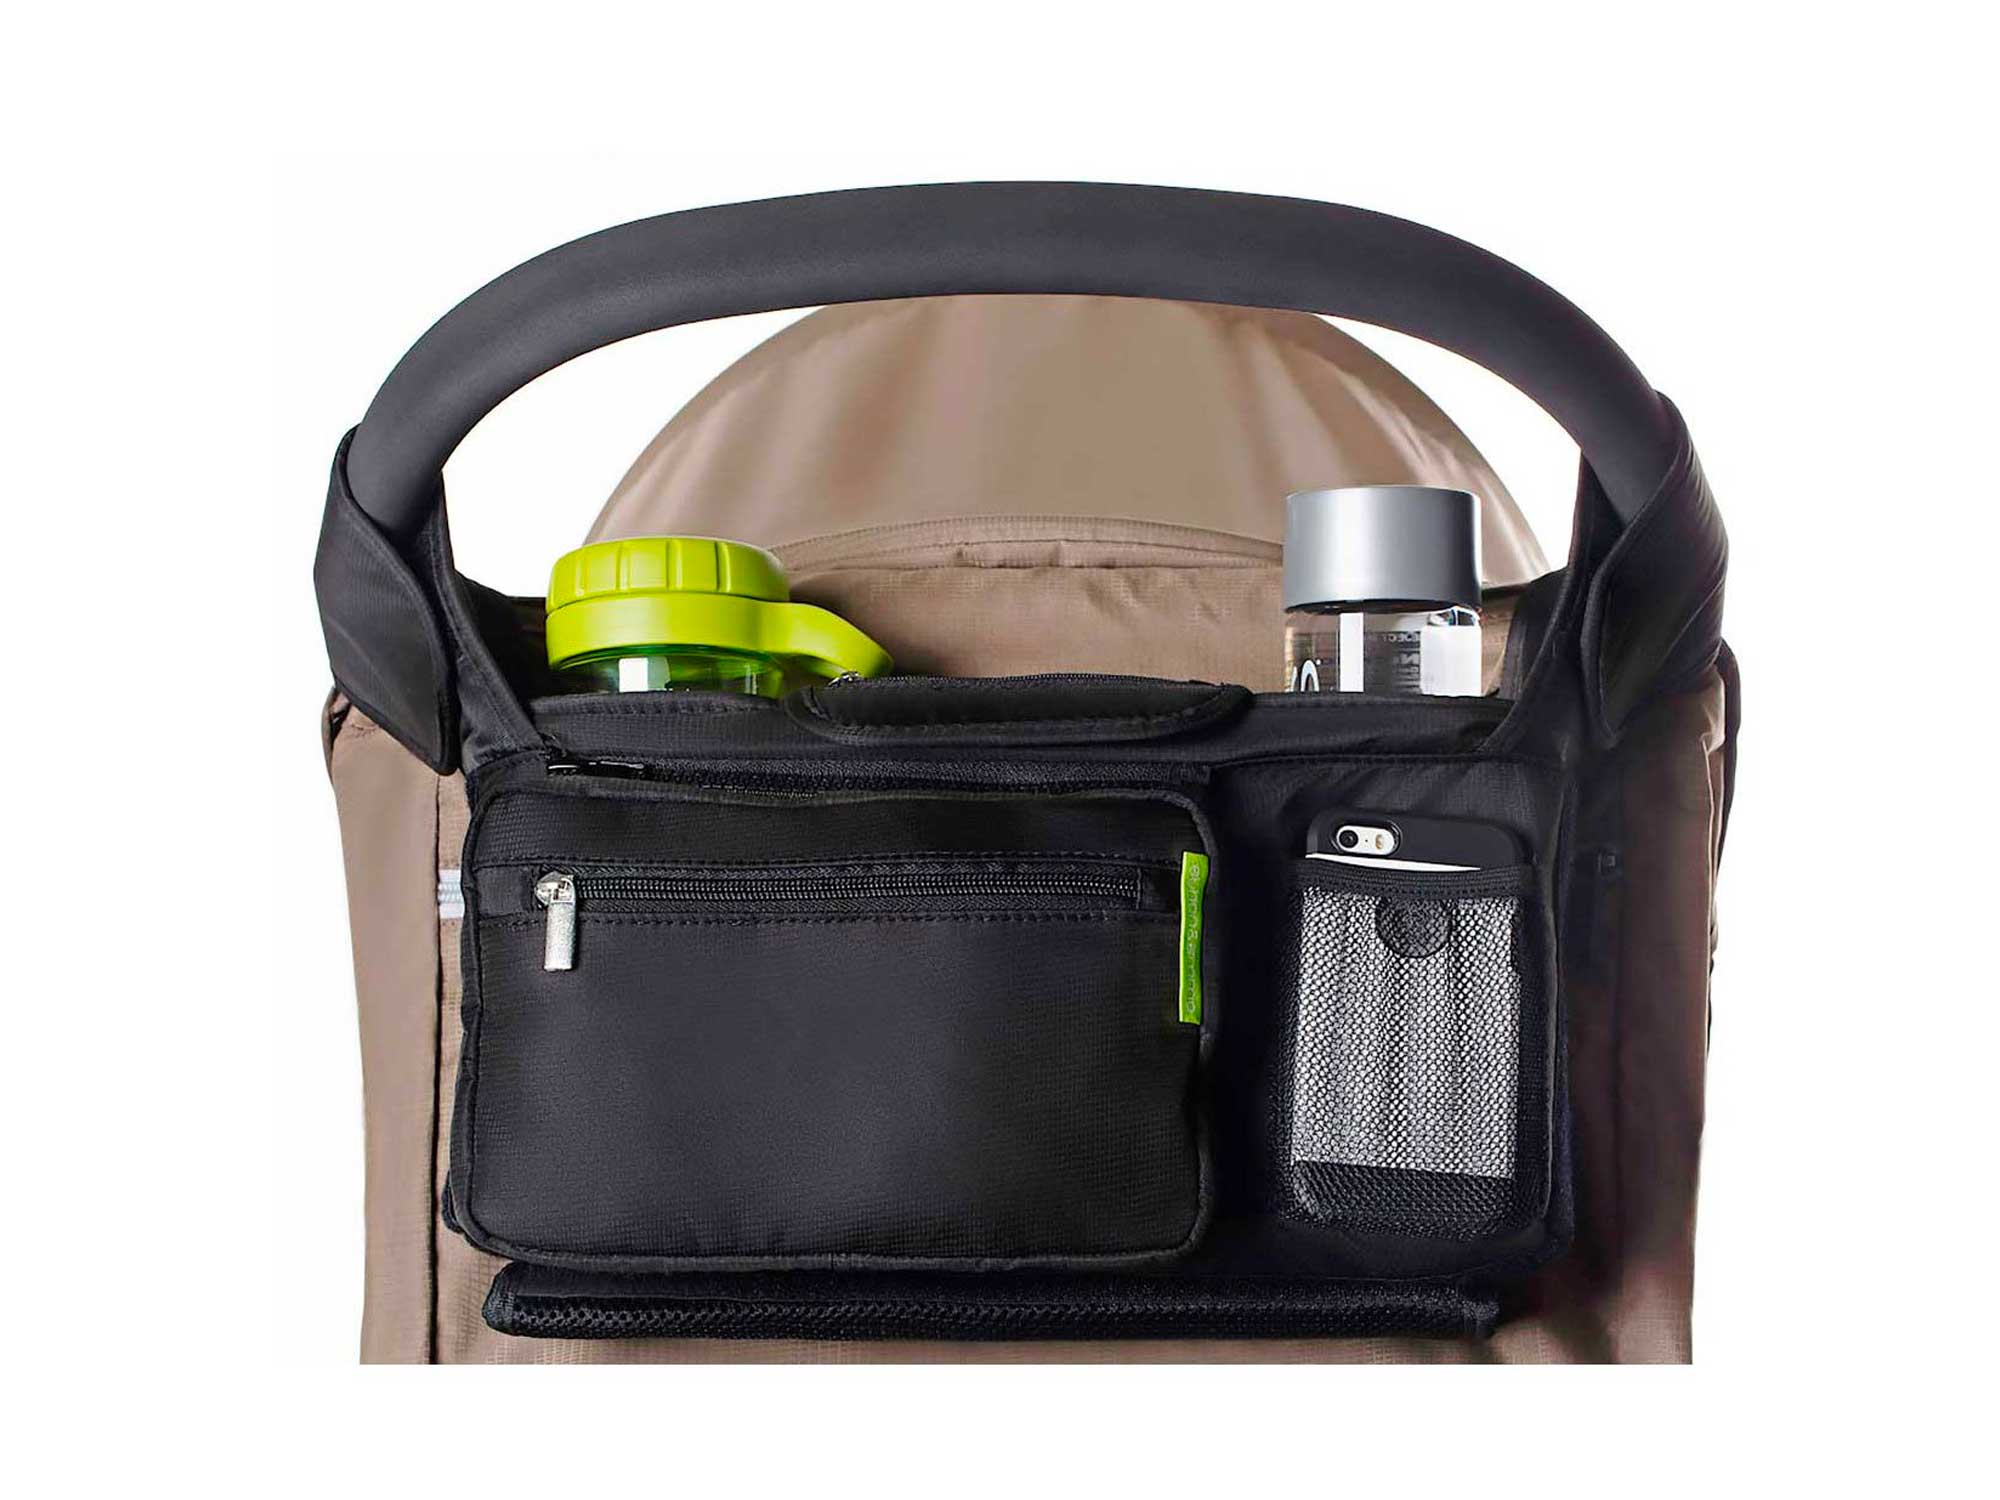 Ethan & Emma Universal Baby Stroller Organizer with Insulated Cup Holders for Smart Moms. Diaper Storage, Secure Straps, Detachable Bag, Pockets for Phone, Keys, Toys. Compact Design Fit All Strollers